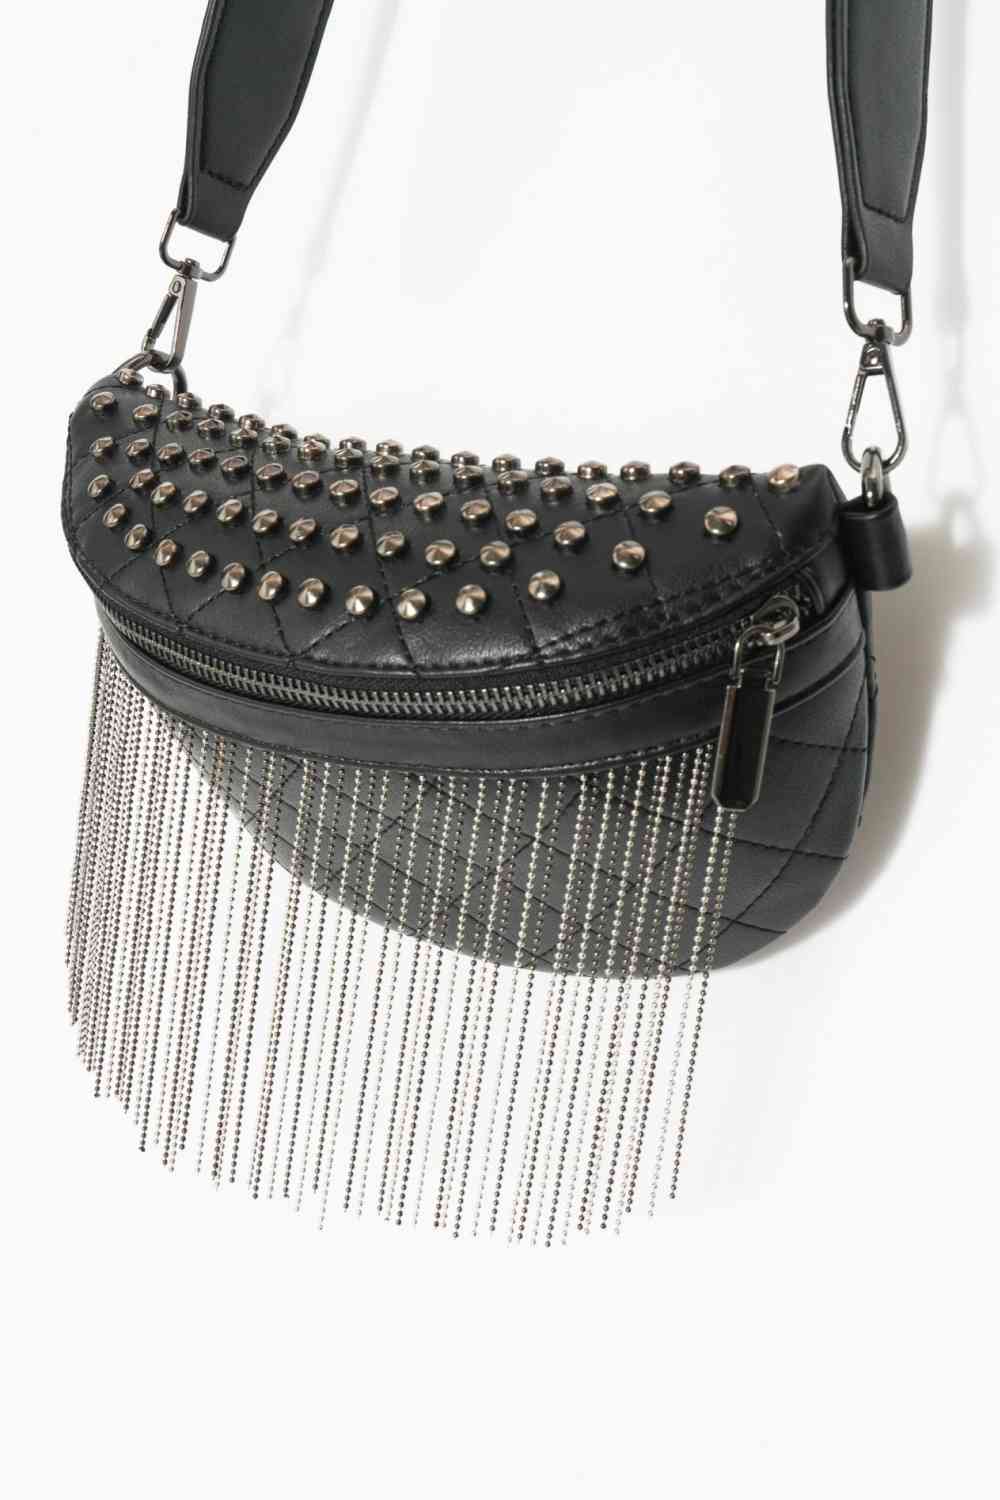 Adored PU Leather Studded Sling Bag with Fringes - BloomBliss.com